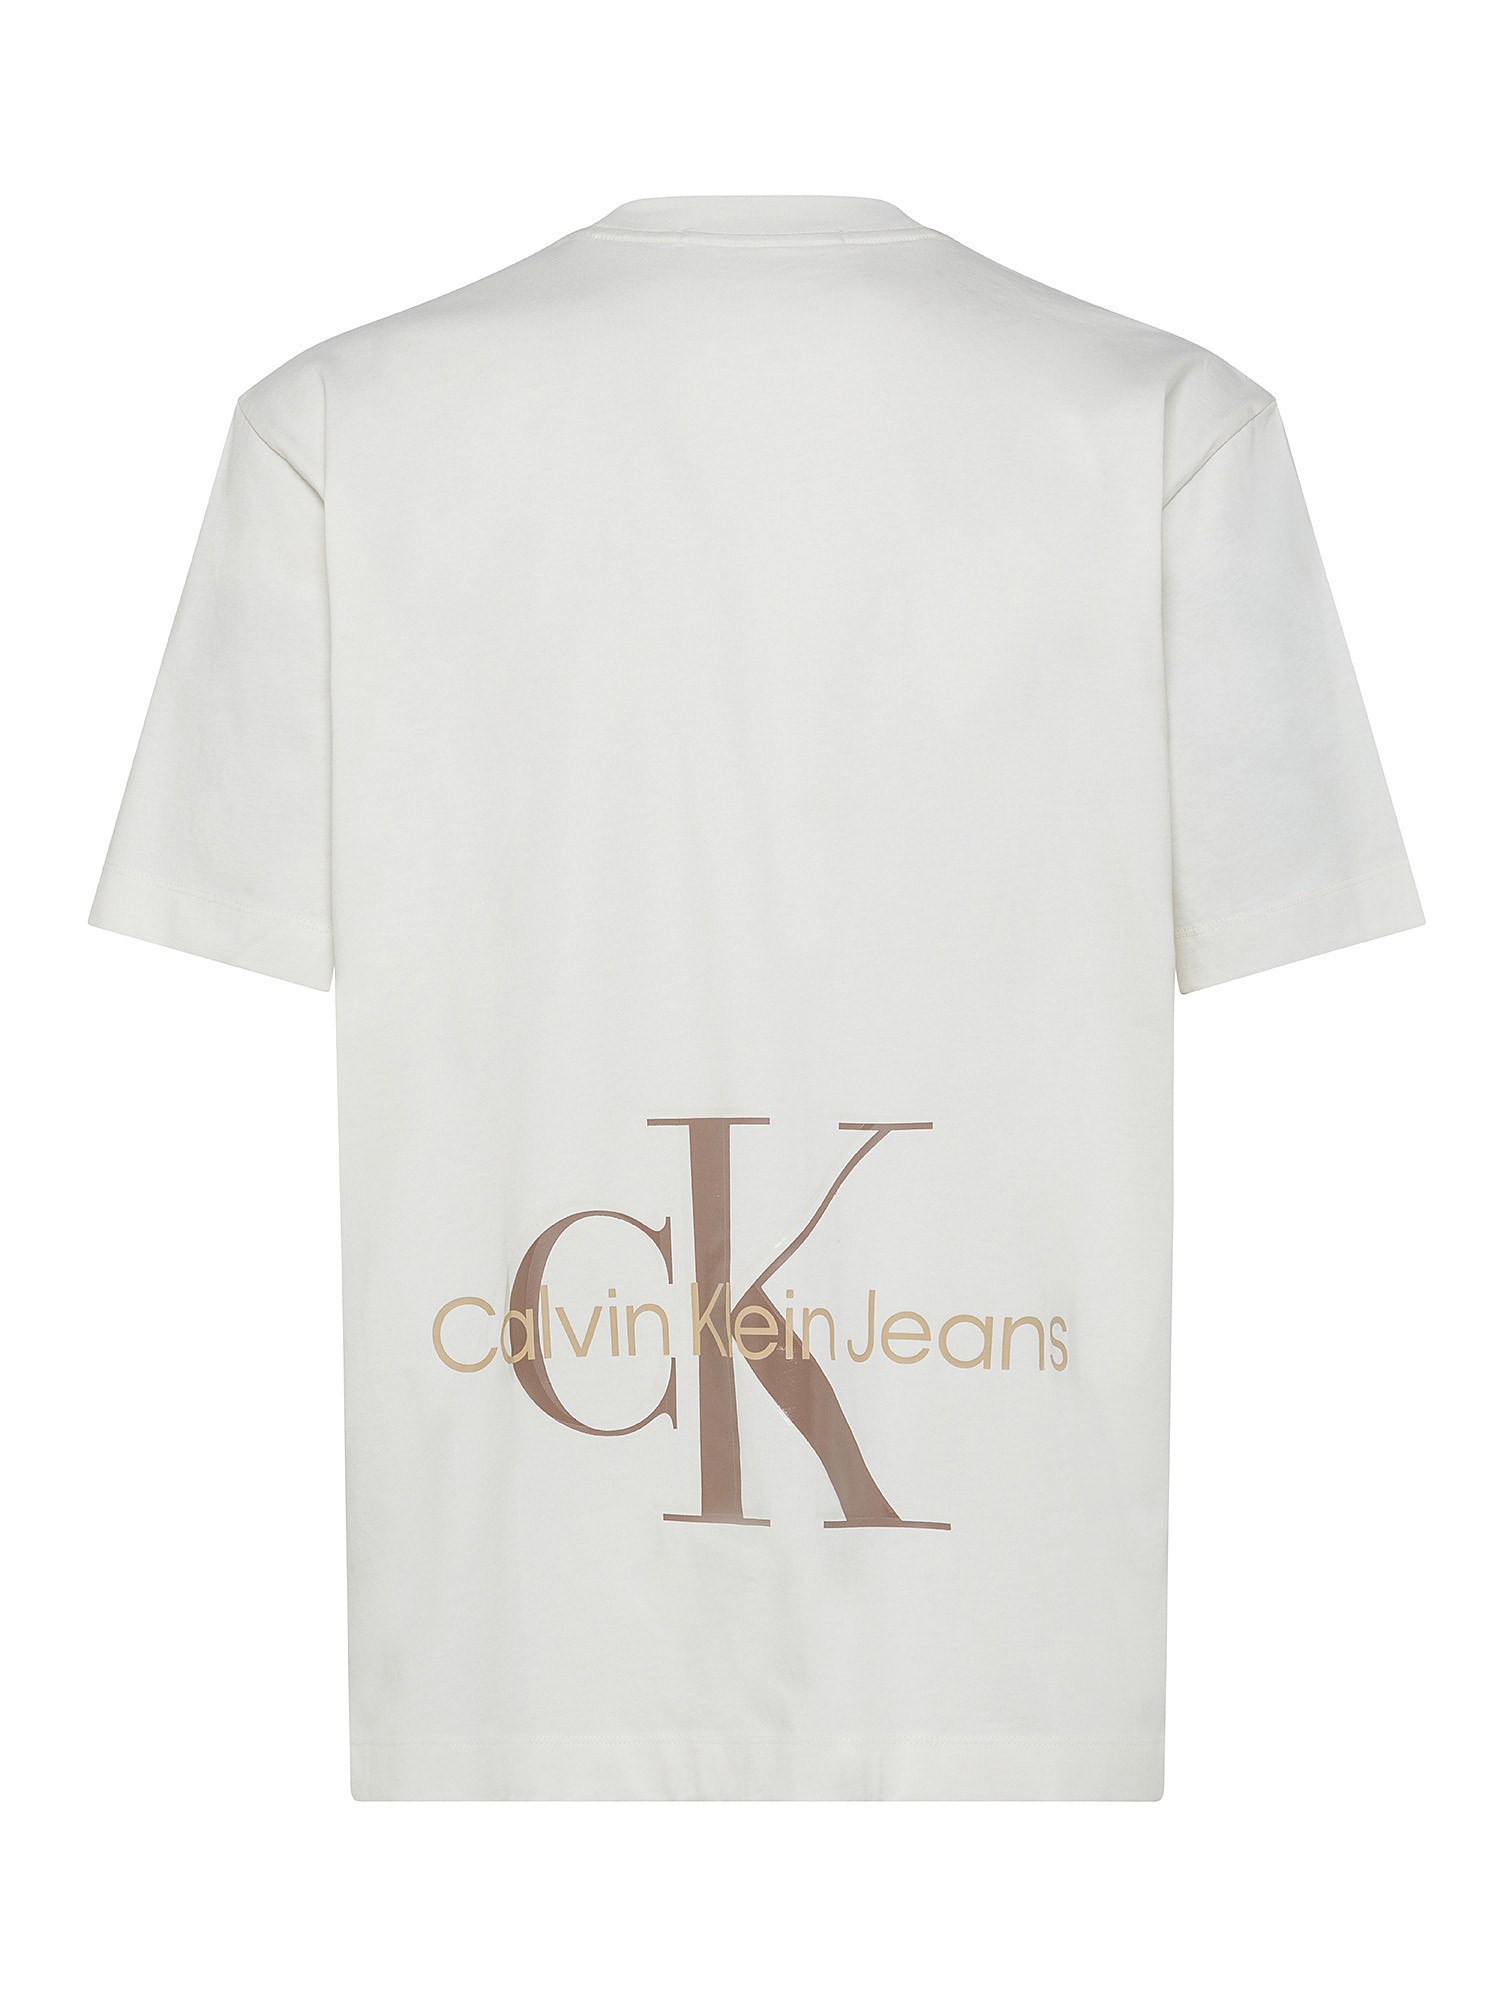 Calvin Klein Jeans - T-shirt relaxed fit in cotone biologico con logo, Bianco, large image number 1